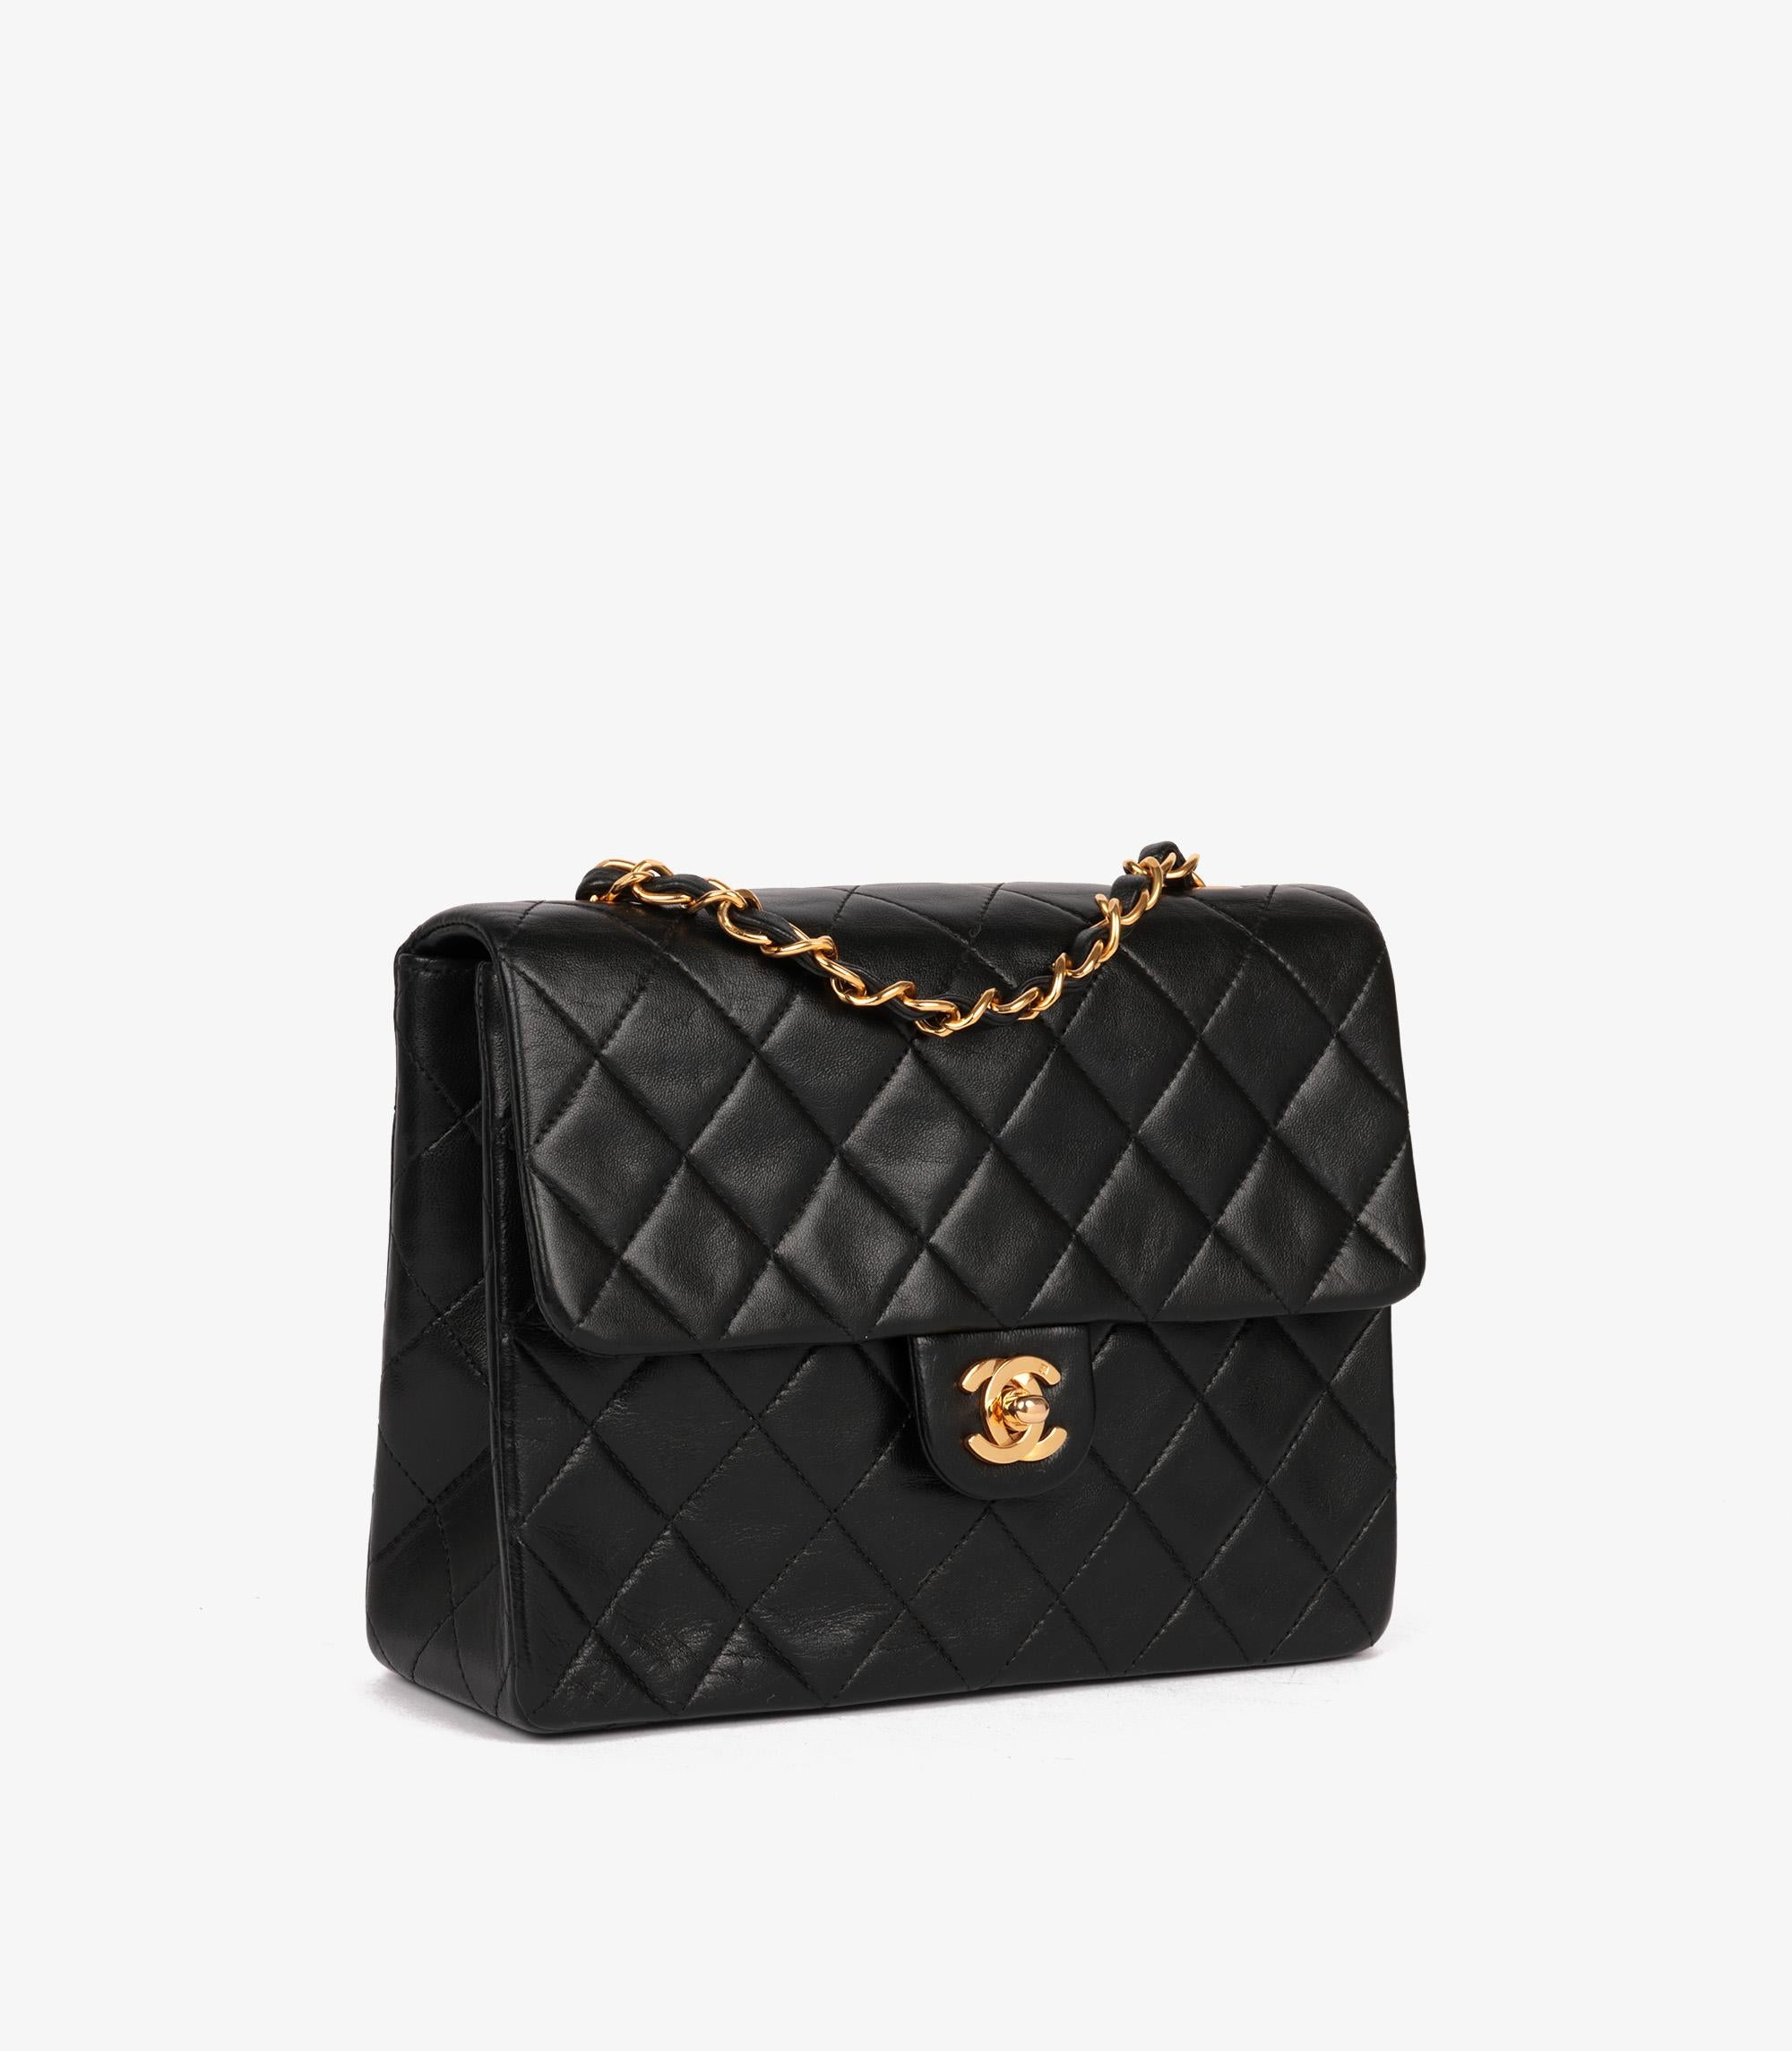 Chanel Black Quilted Lambskin Vintage Square Mini Flap Bag

Brand- Chanel
Model- Square Mini Flap Bag
Product Type- Crossbody, Shoulder
Serial Number- 20*****
Age- Circa 1991
Accompanied By- Chanel Dust Bag, Authenticity Card
Colour- Black
Hardware-